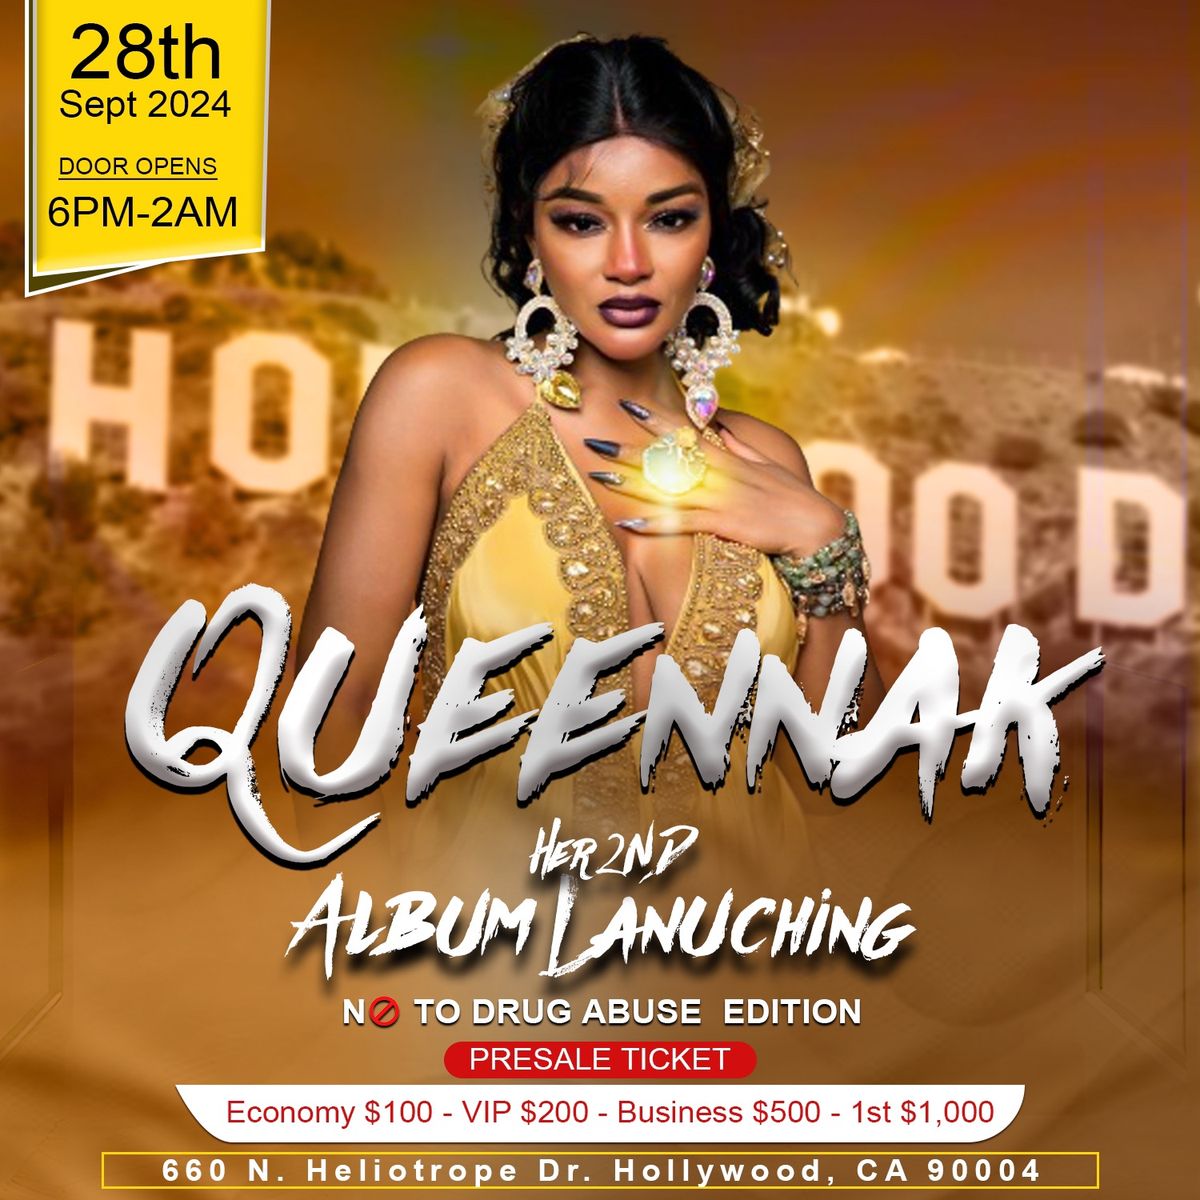 QueenNAK 2nd Album Laughing in Hollywood 